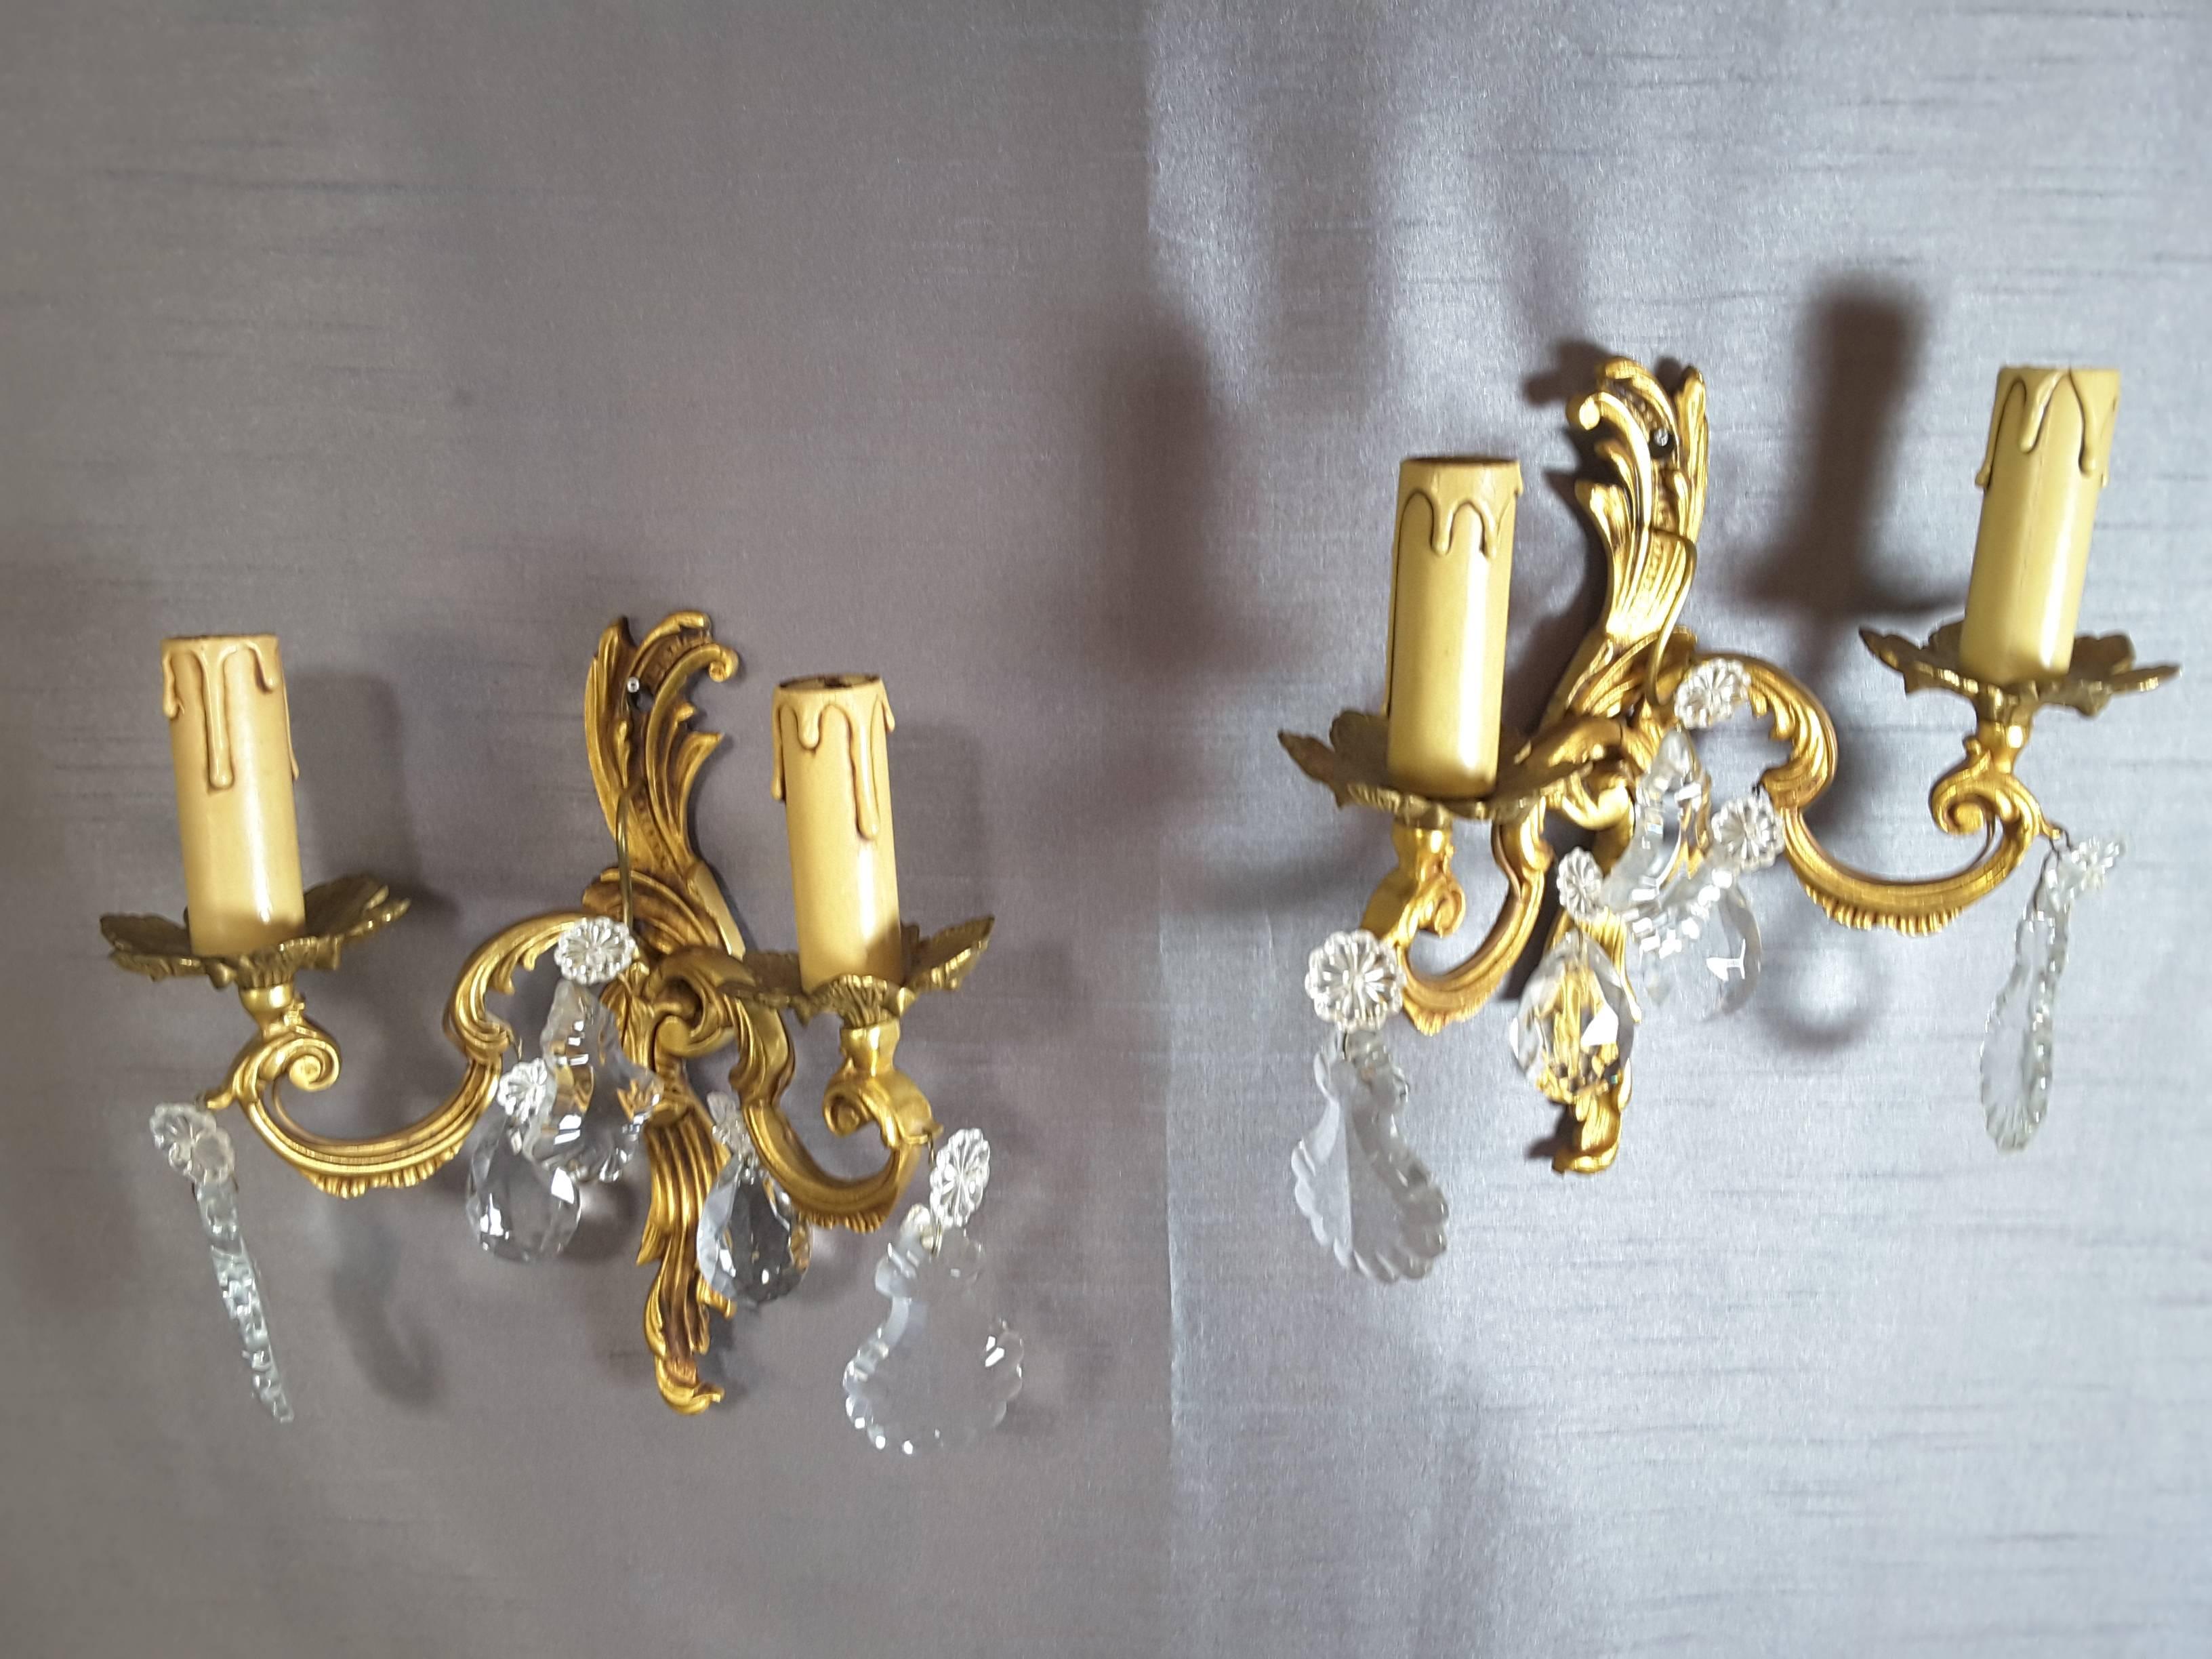 Pair of Brass/Gilt Wall Sconces with Floral Crystals 2